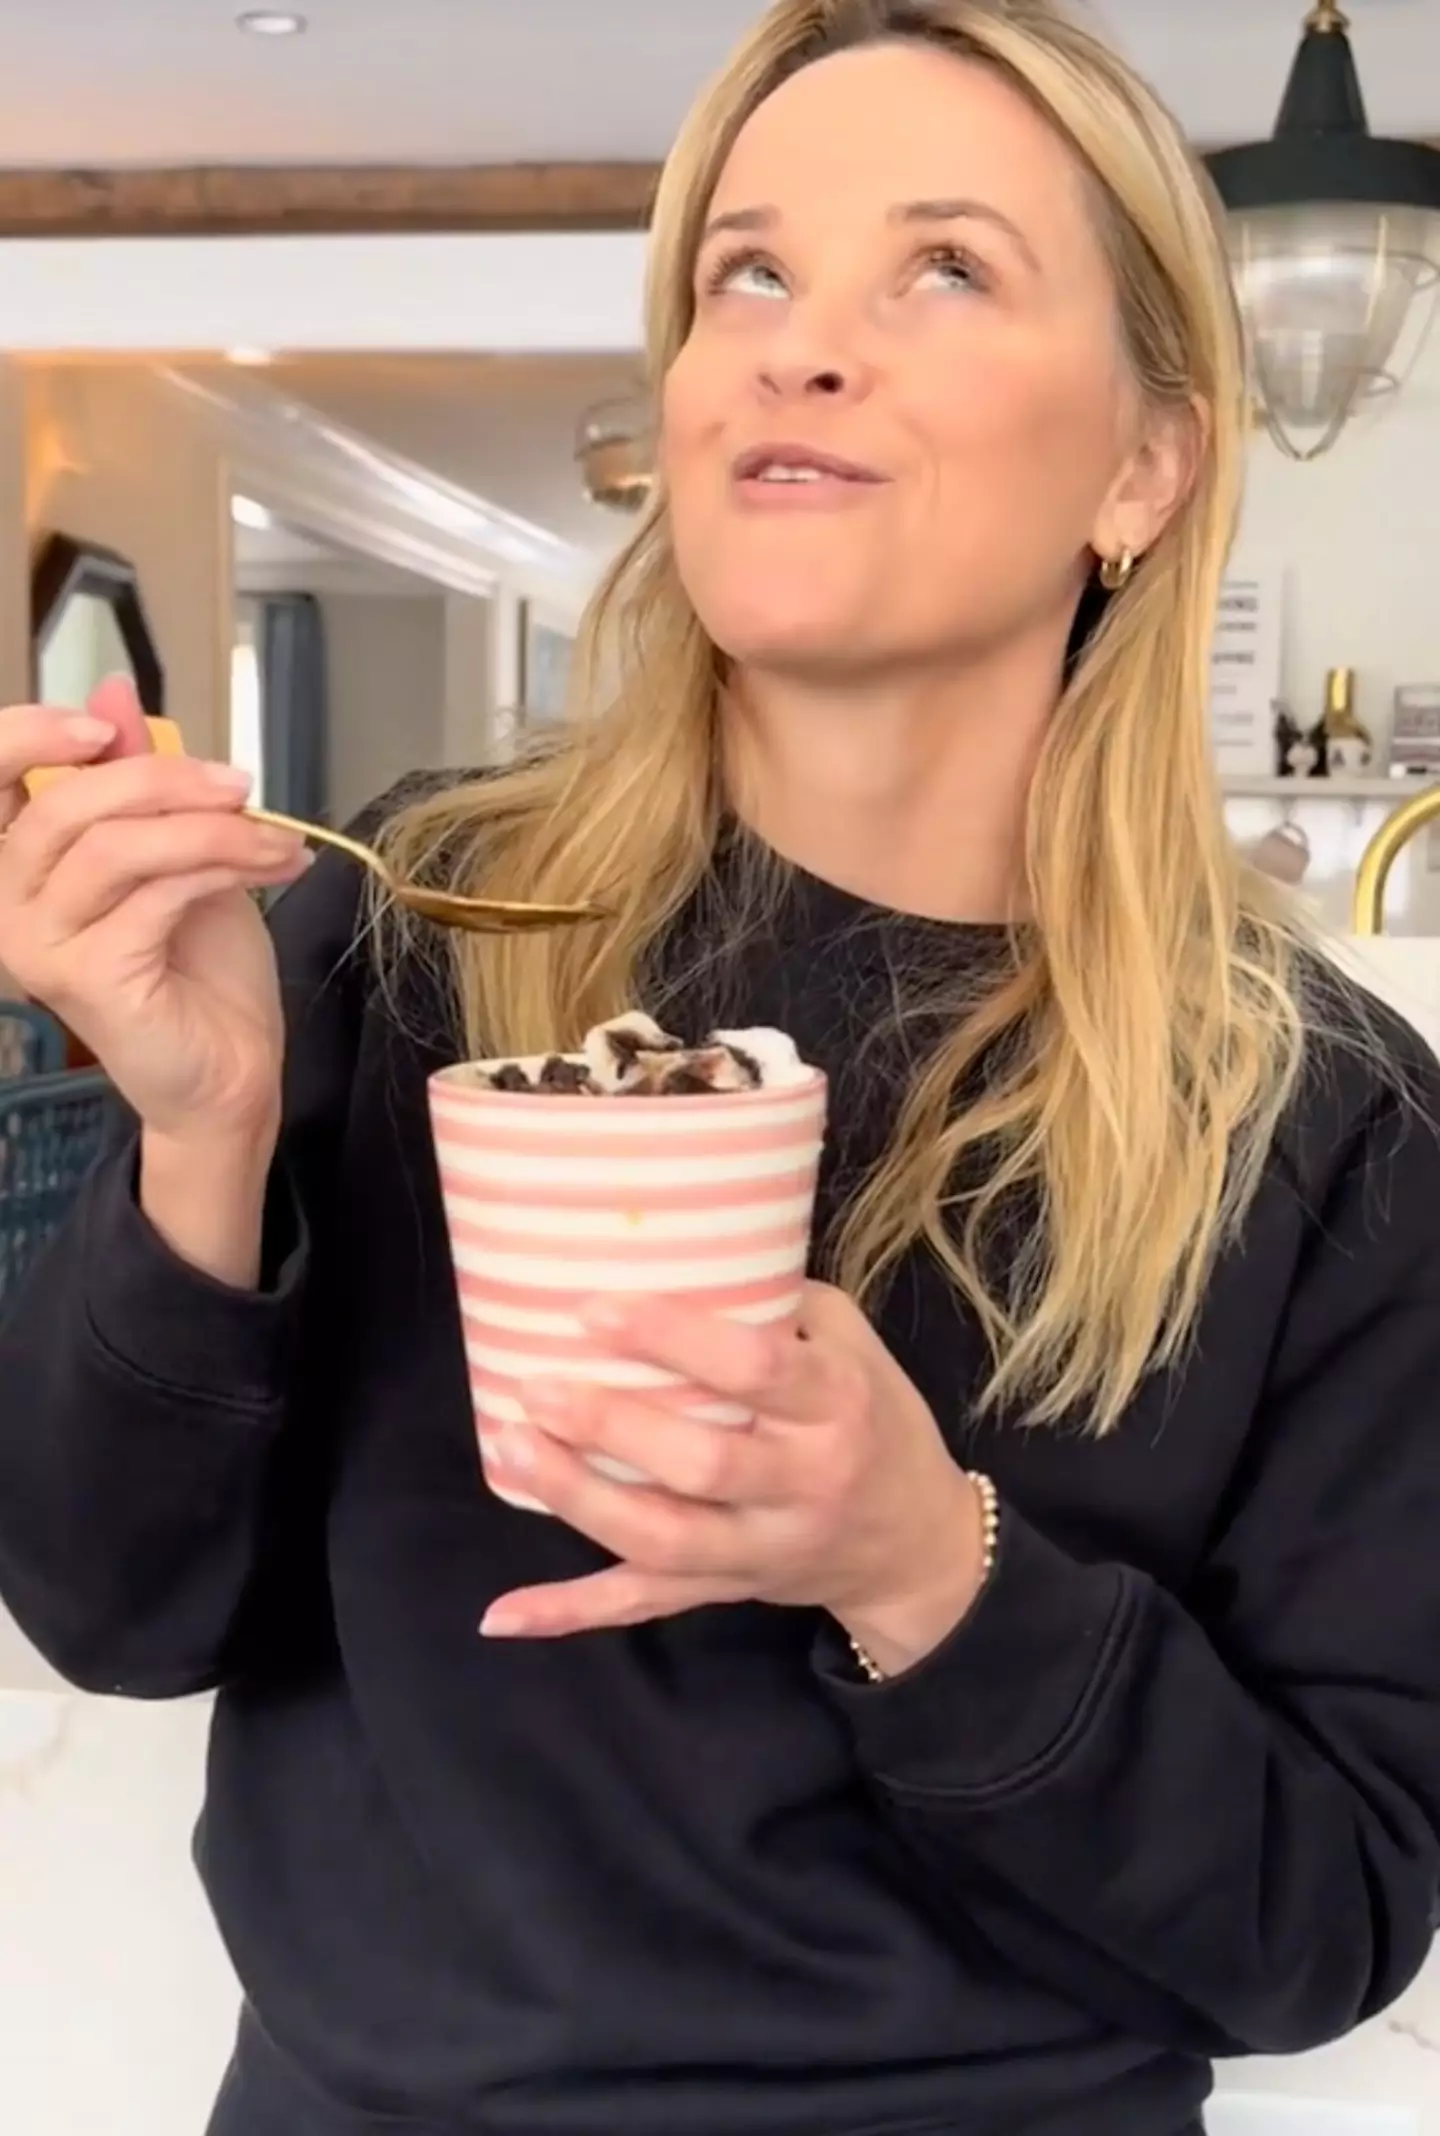 The actress reckons her Snow Salt Chococinno is to die for.